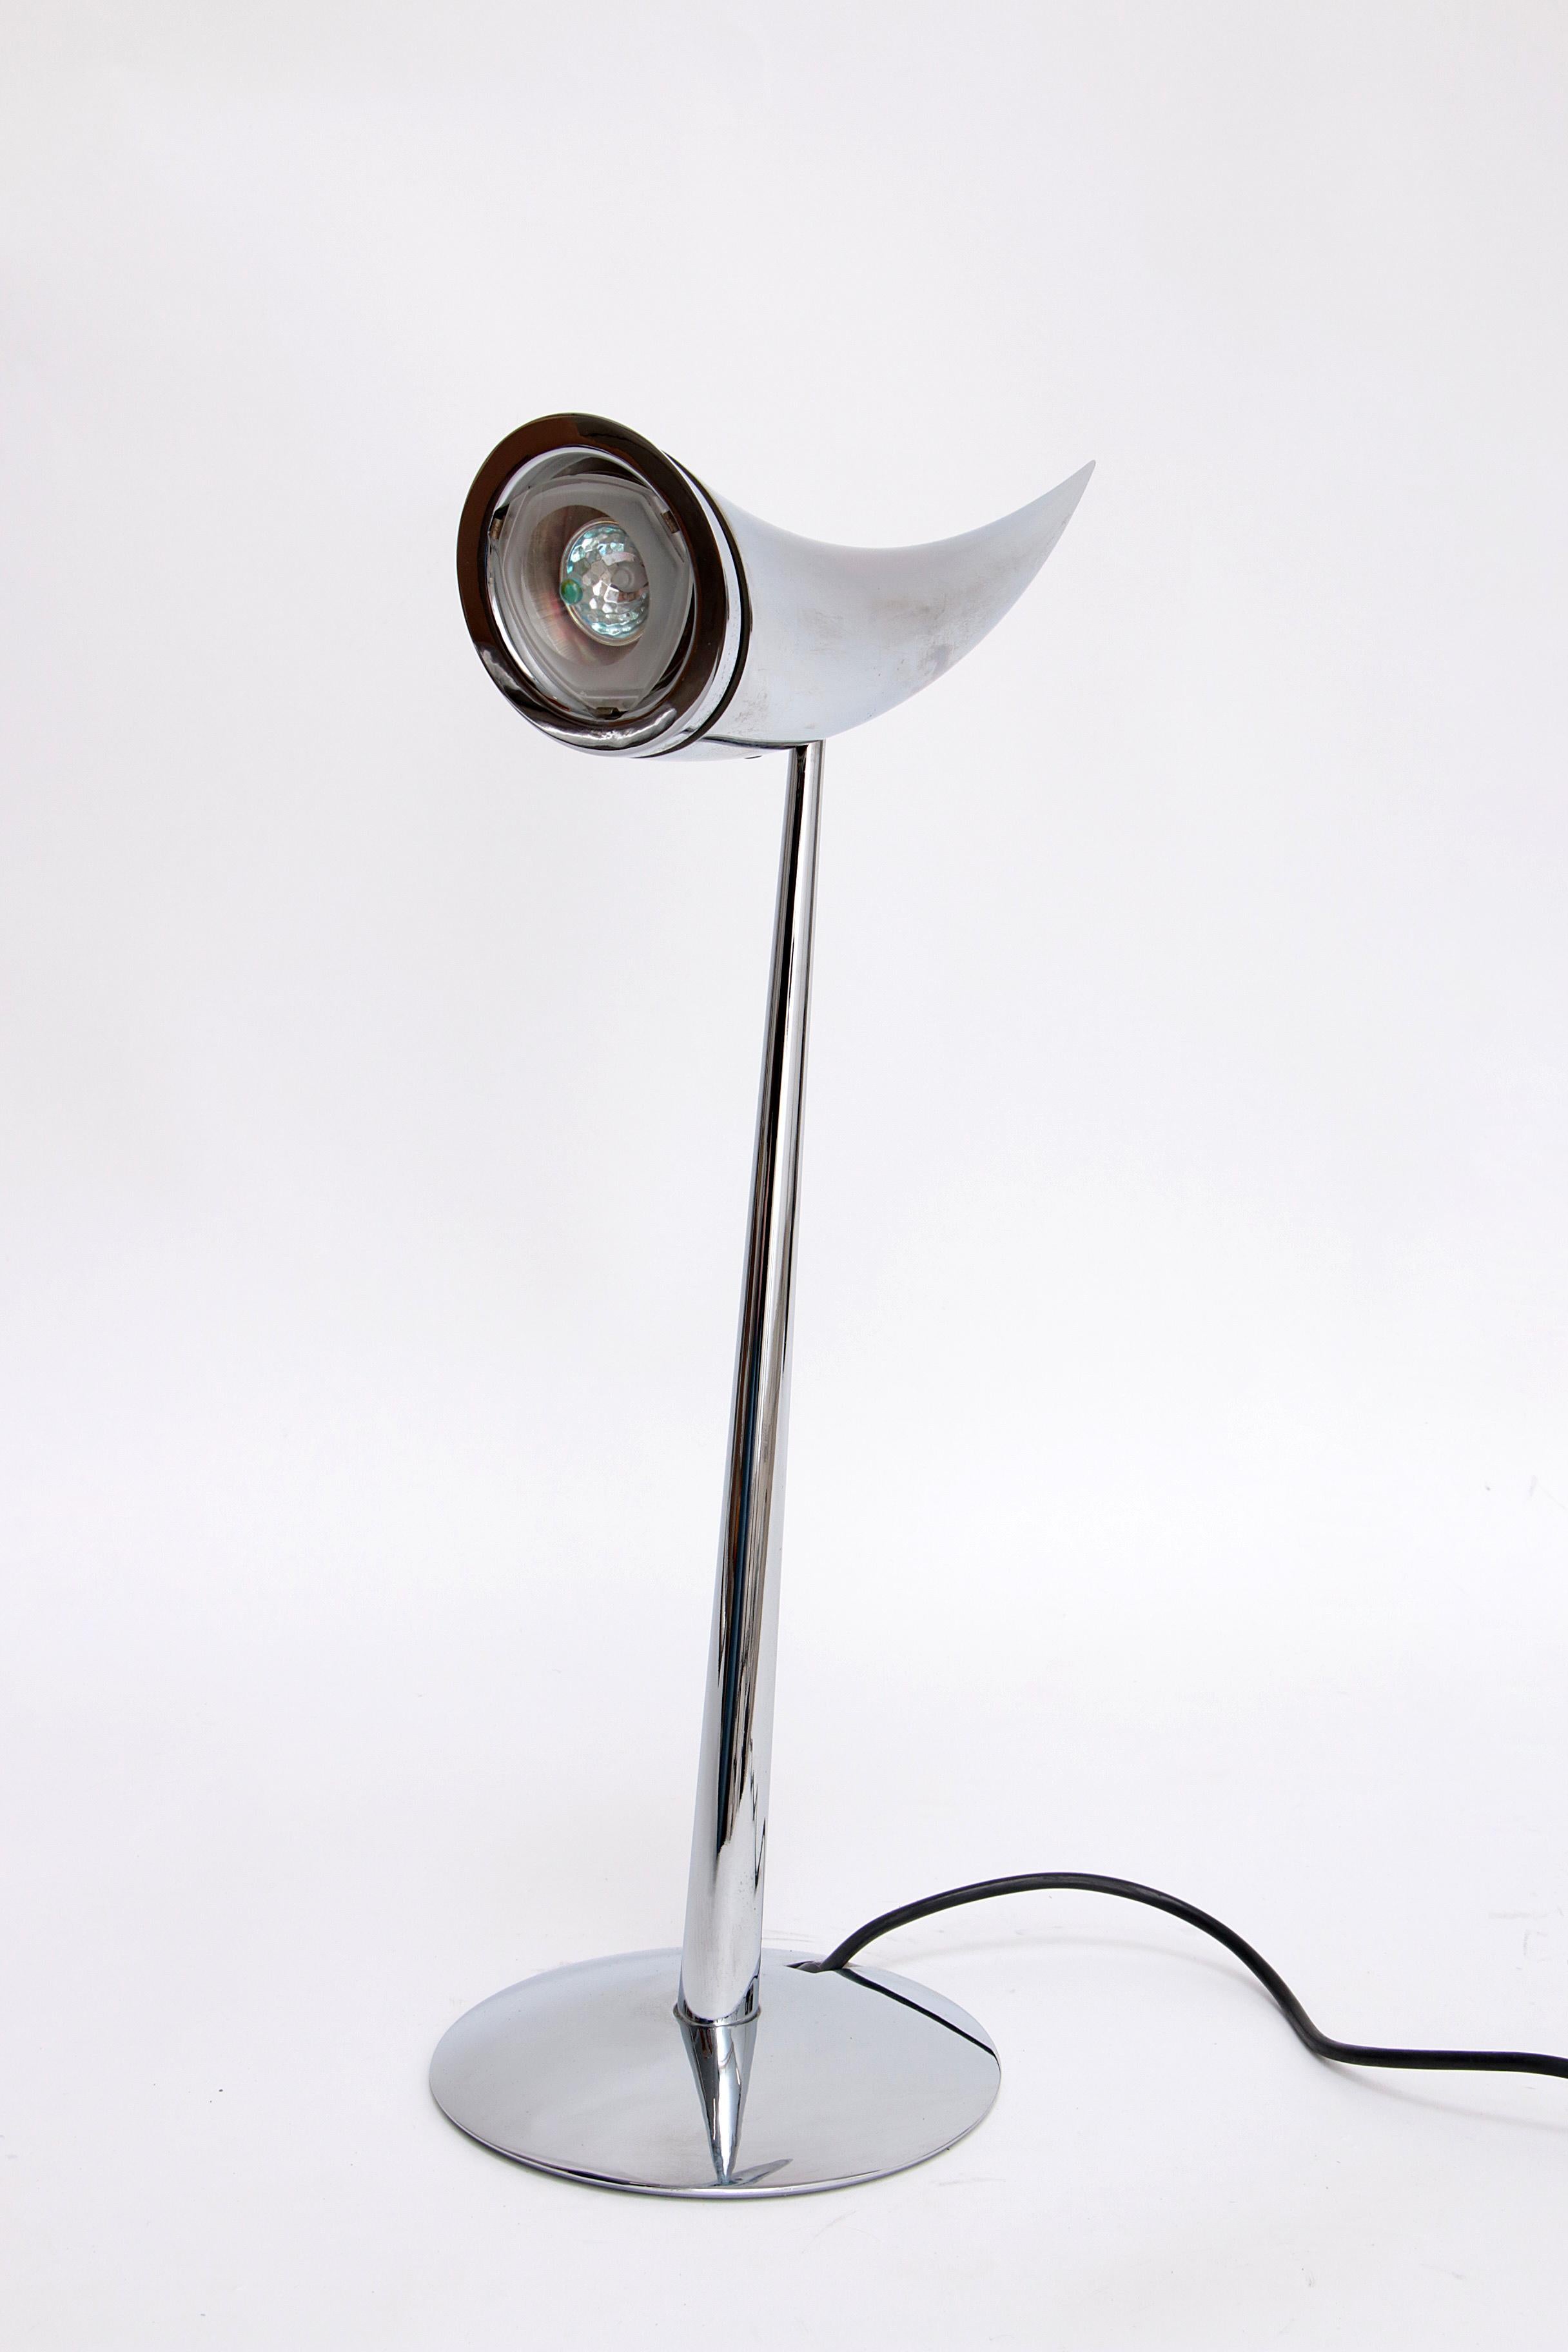 Italian Philippe Starck Design Ara Table Lamp by for Flos  1988 For Sale